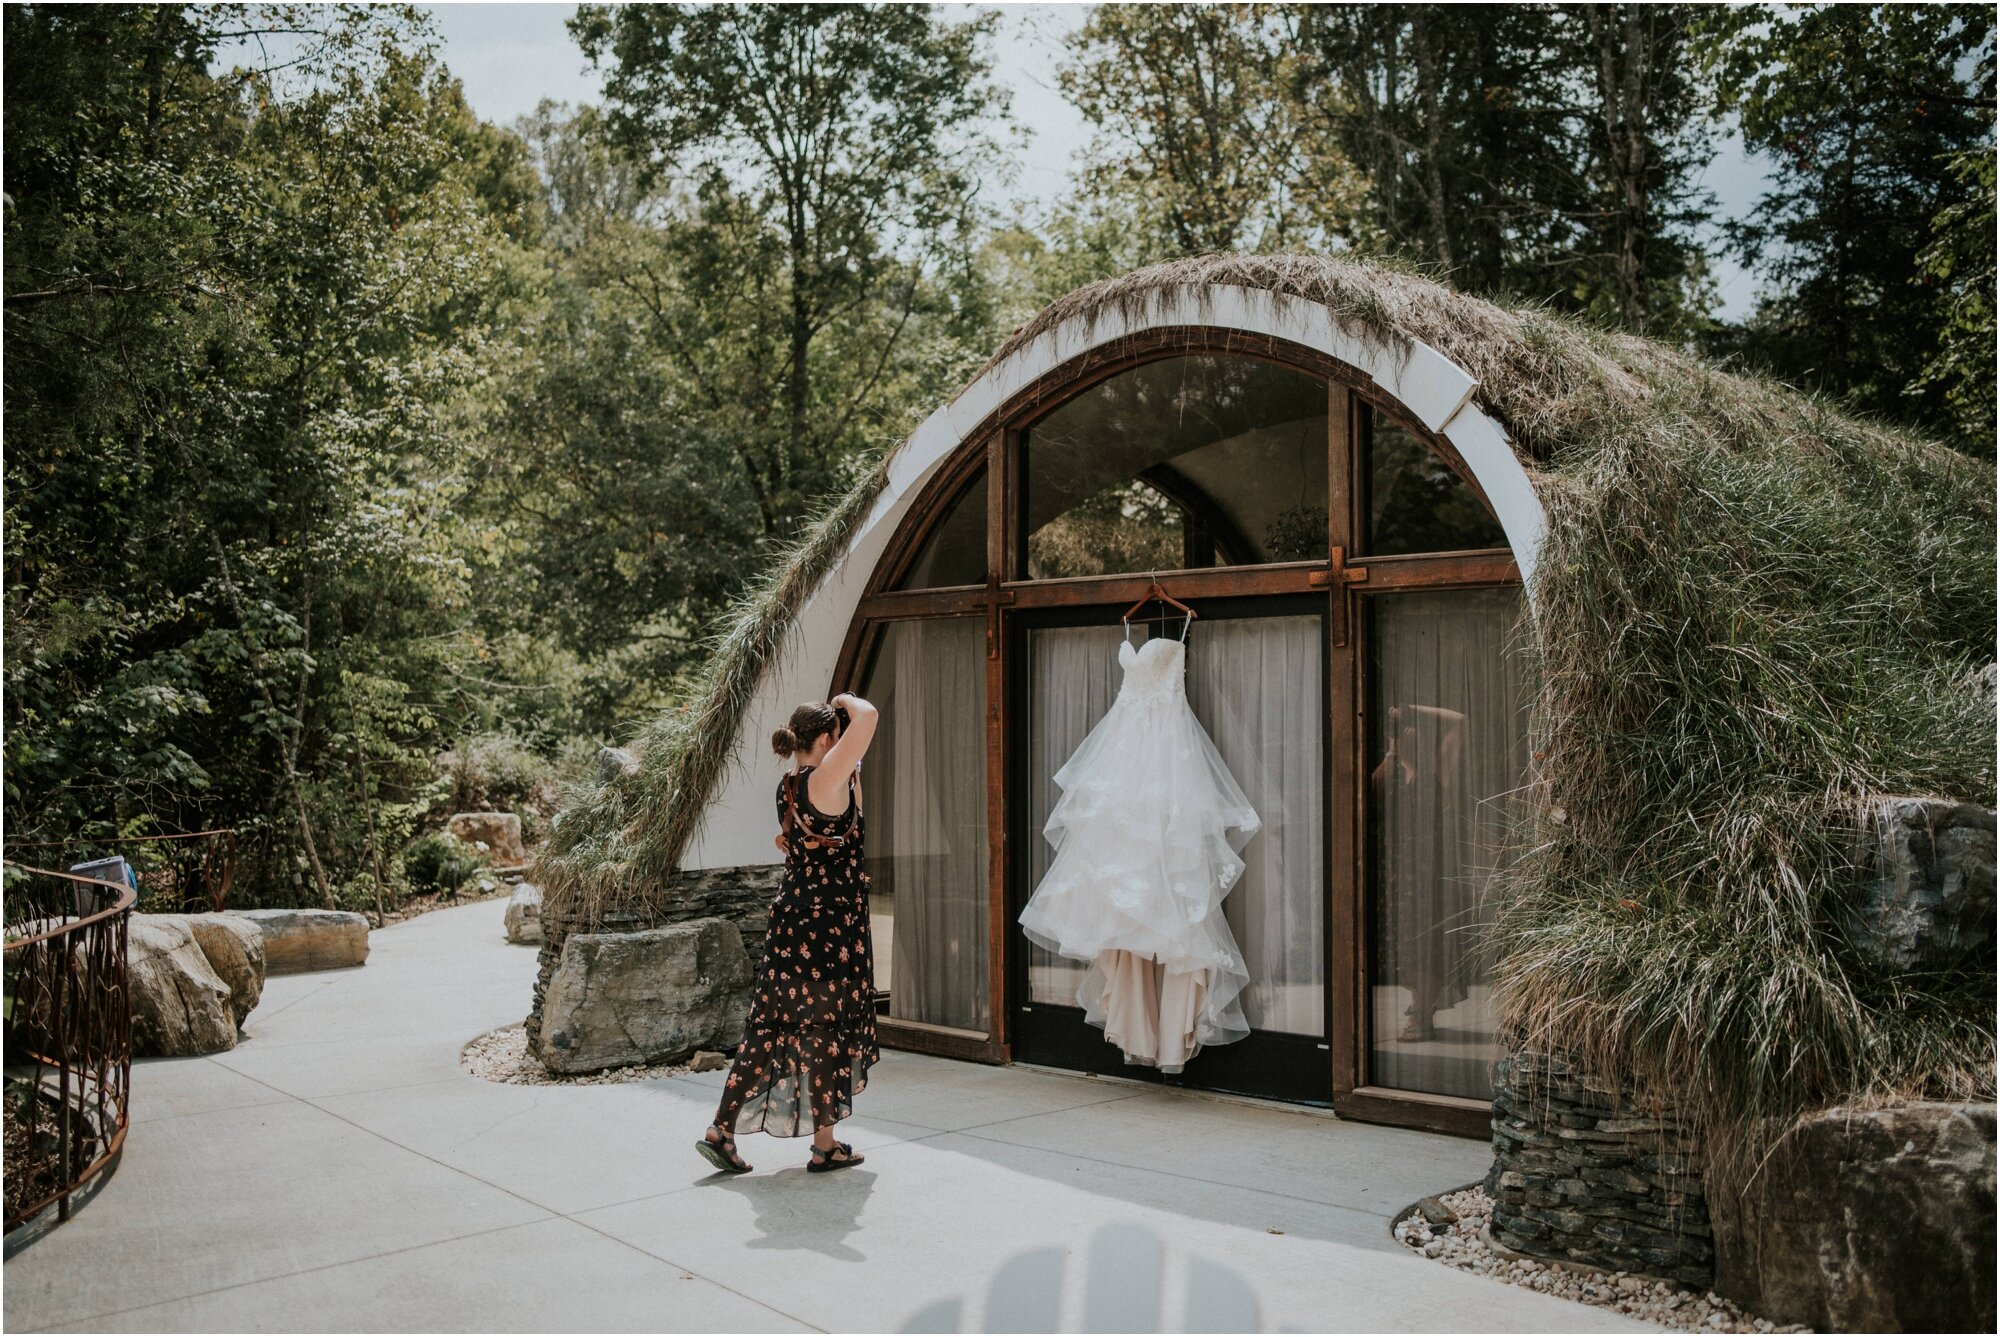   Getting the perfect shot of the dress at the hobbit house.   Photo: Jeremy Gouge  